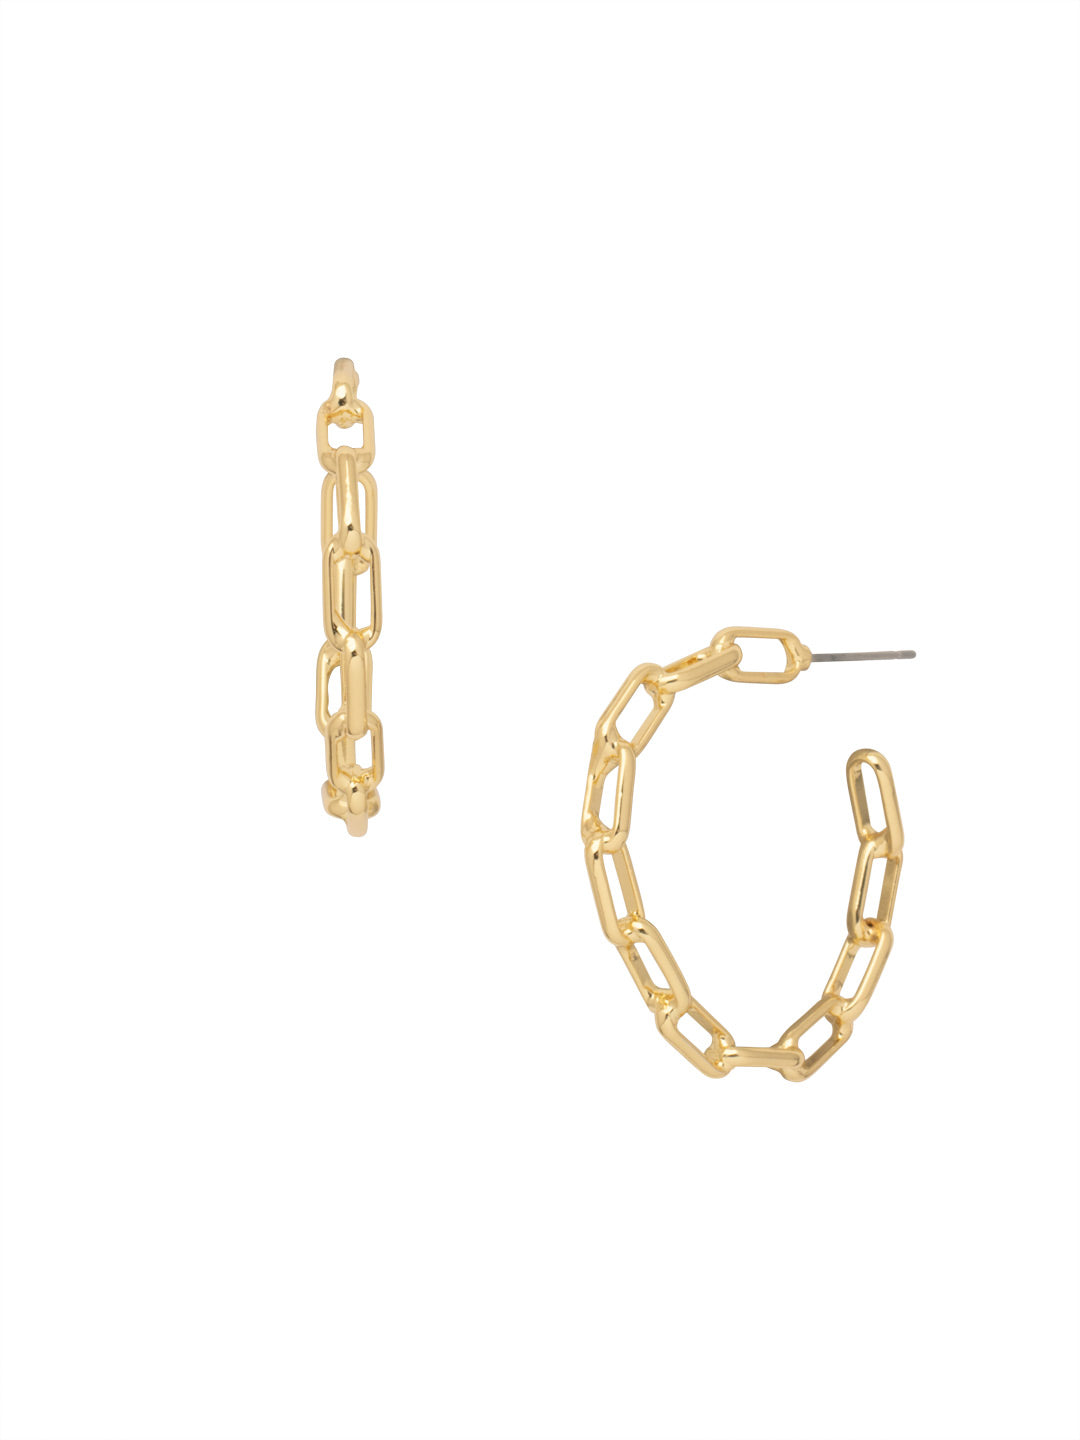 Chain Link Hoop Earrings - 8EA4BGMTL - <p>The Chain Link Hoop Earrings feature a line of frozen chain links on a post. From Sorrelli's Bare Metallic collection in our Bright Gold-tone finish.</p>